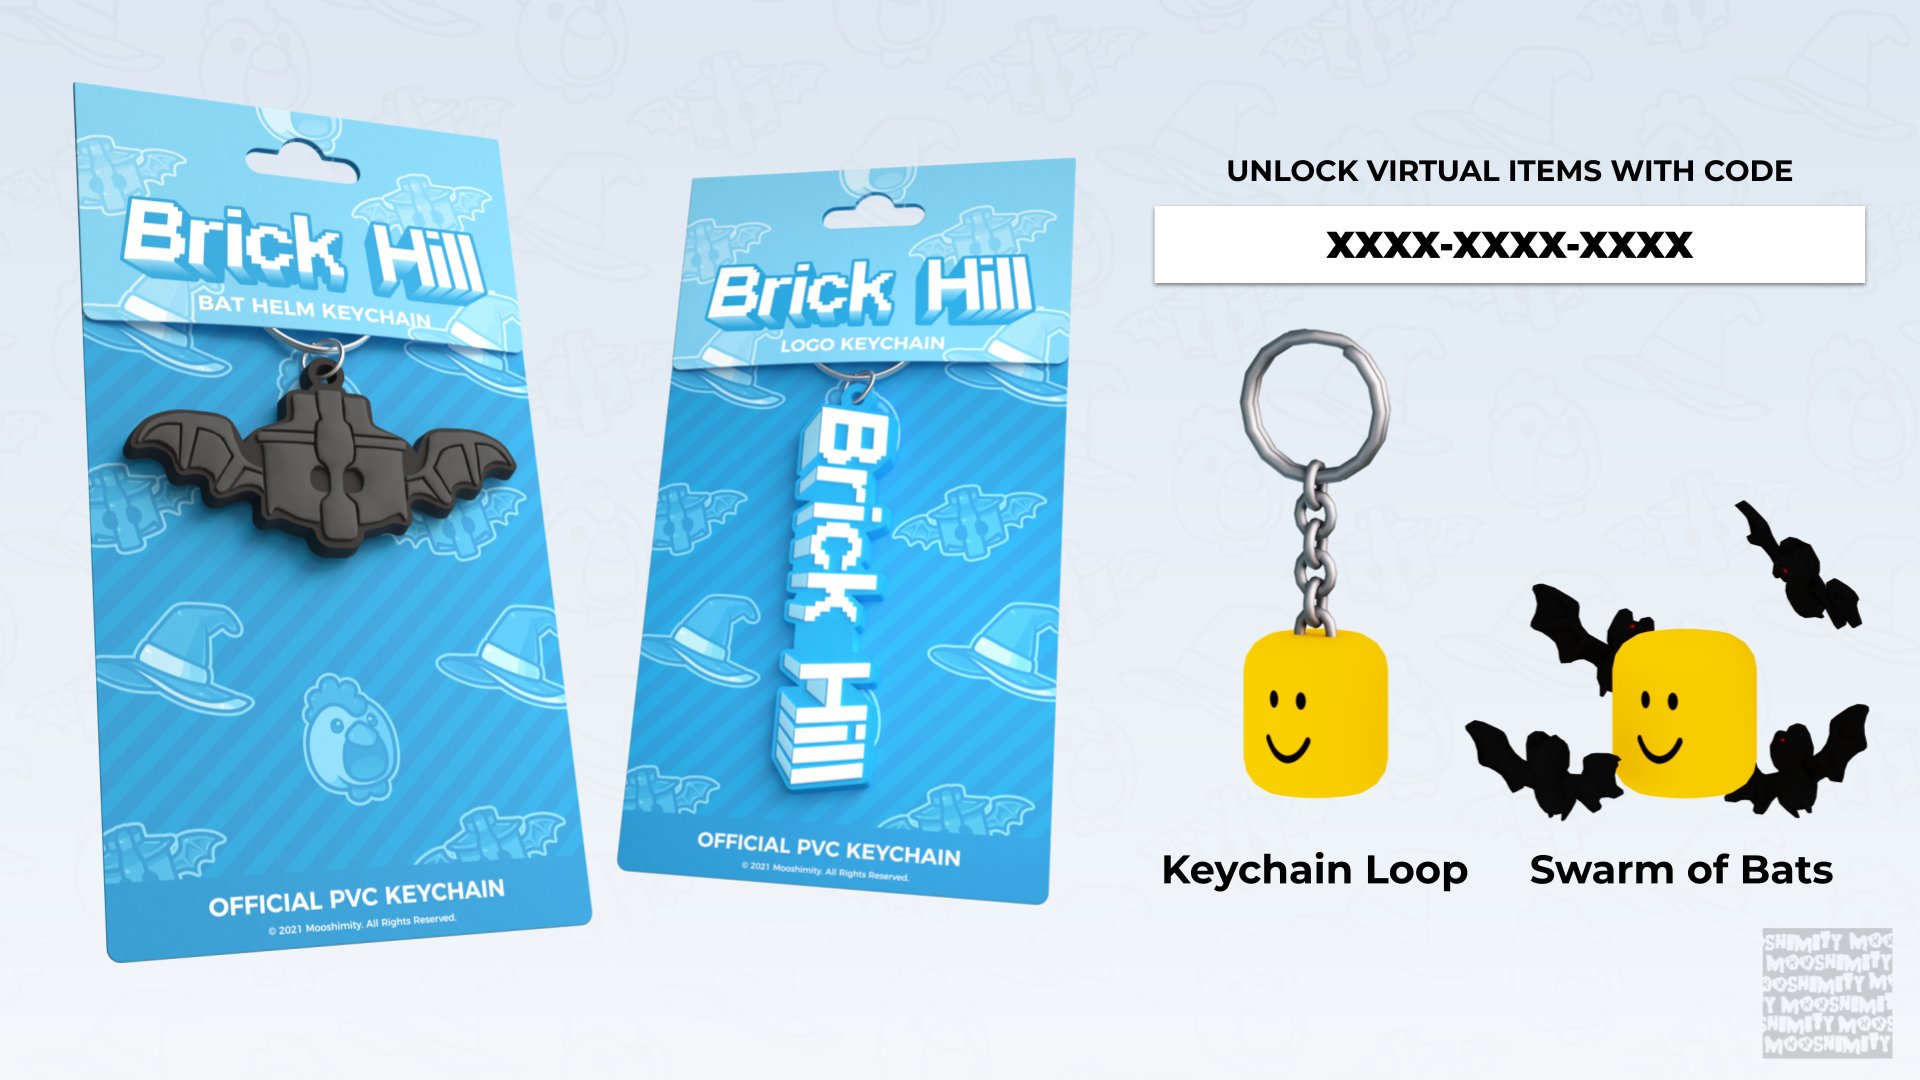 Brick Hill on X: New keychains are being worked on and will be released at   in the future for $9.59 USD each! They'll come with  two virtual items through codes and